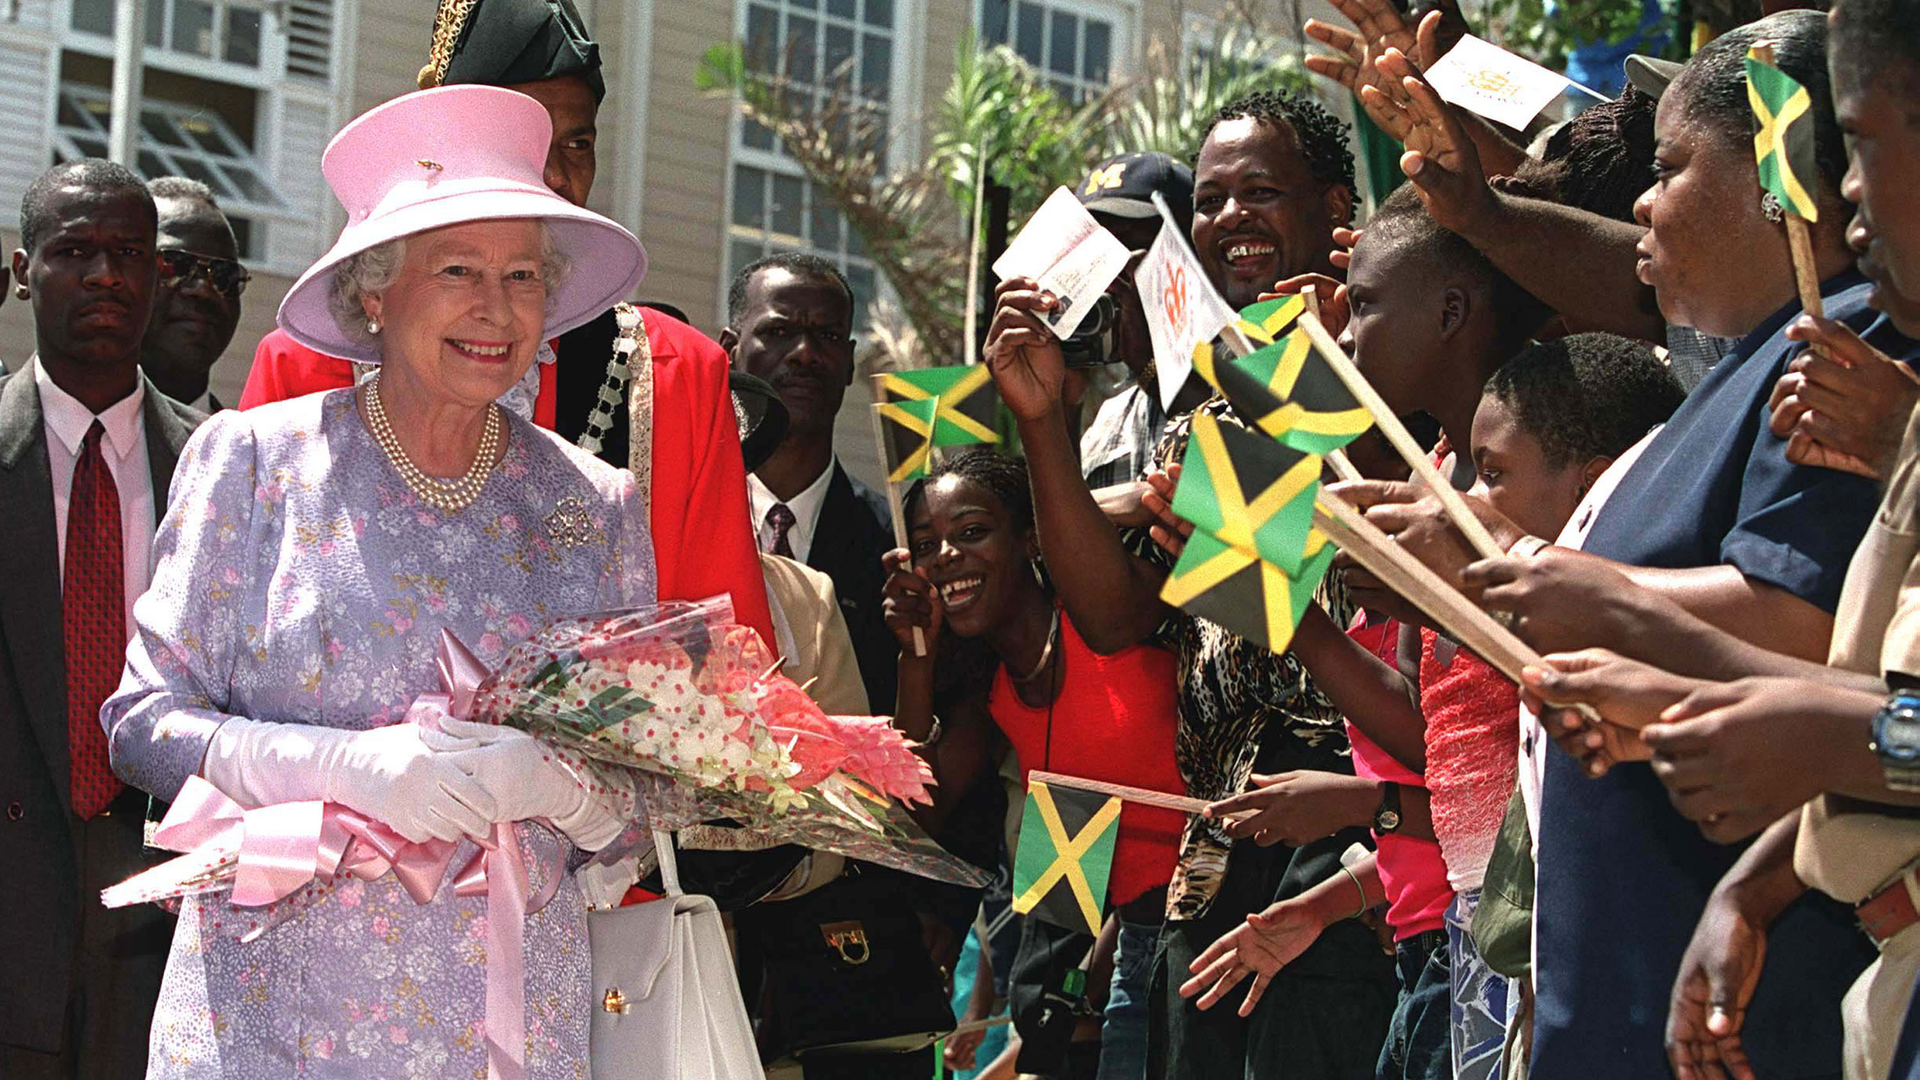 <p>                     Jamaica is another country with links to the royals that span decades - with Queen Elizabeth visiting on an official tour in 2002, and Prince William and Kate Middleton following in her footsteps in 2022. Several members of the family have checked into the 400-acre Half Moon resort, which boasts beautiful beaches, a golf course and an equestrian centre.                   </p>